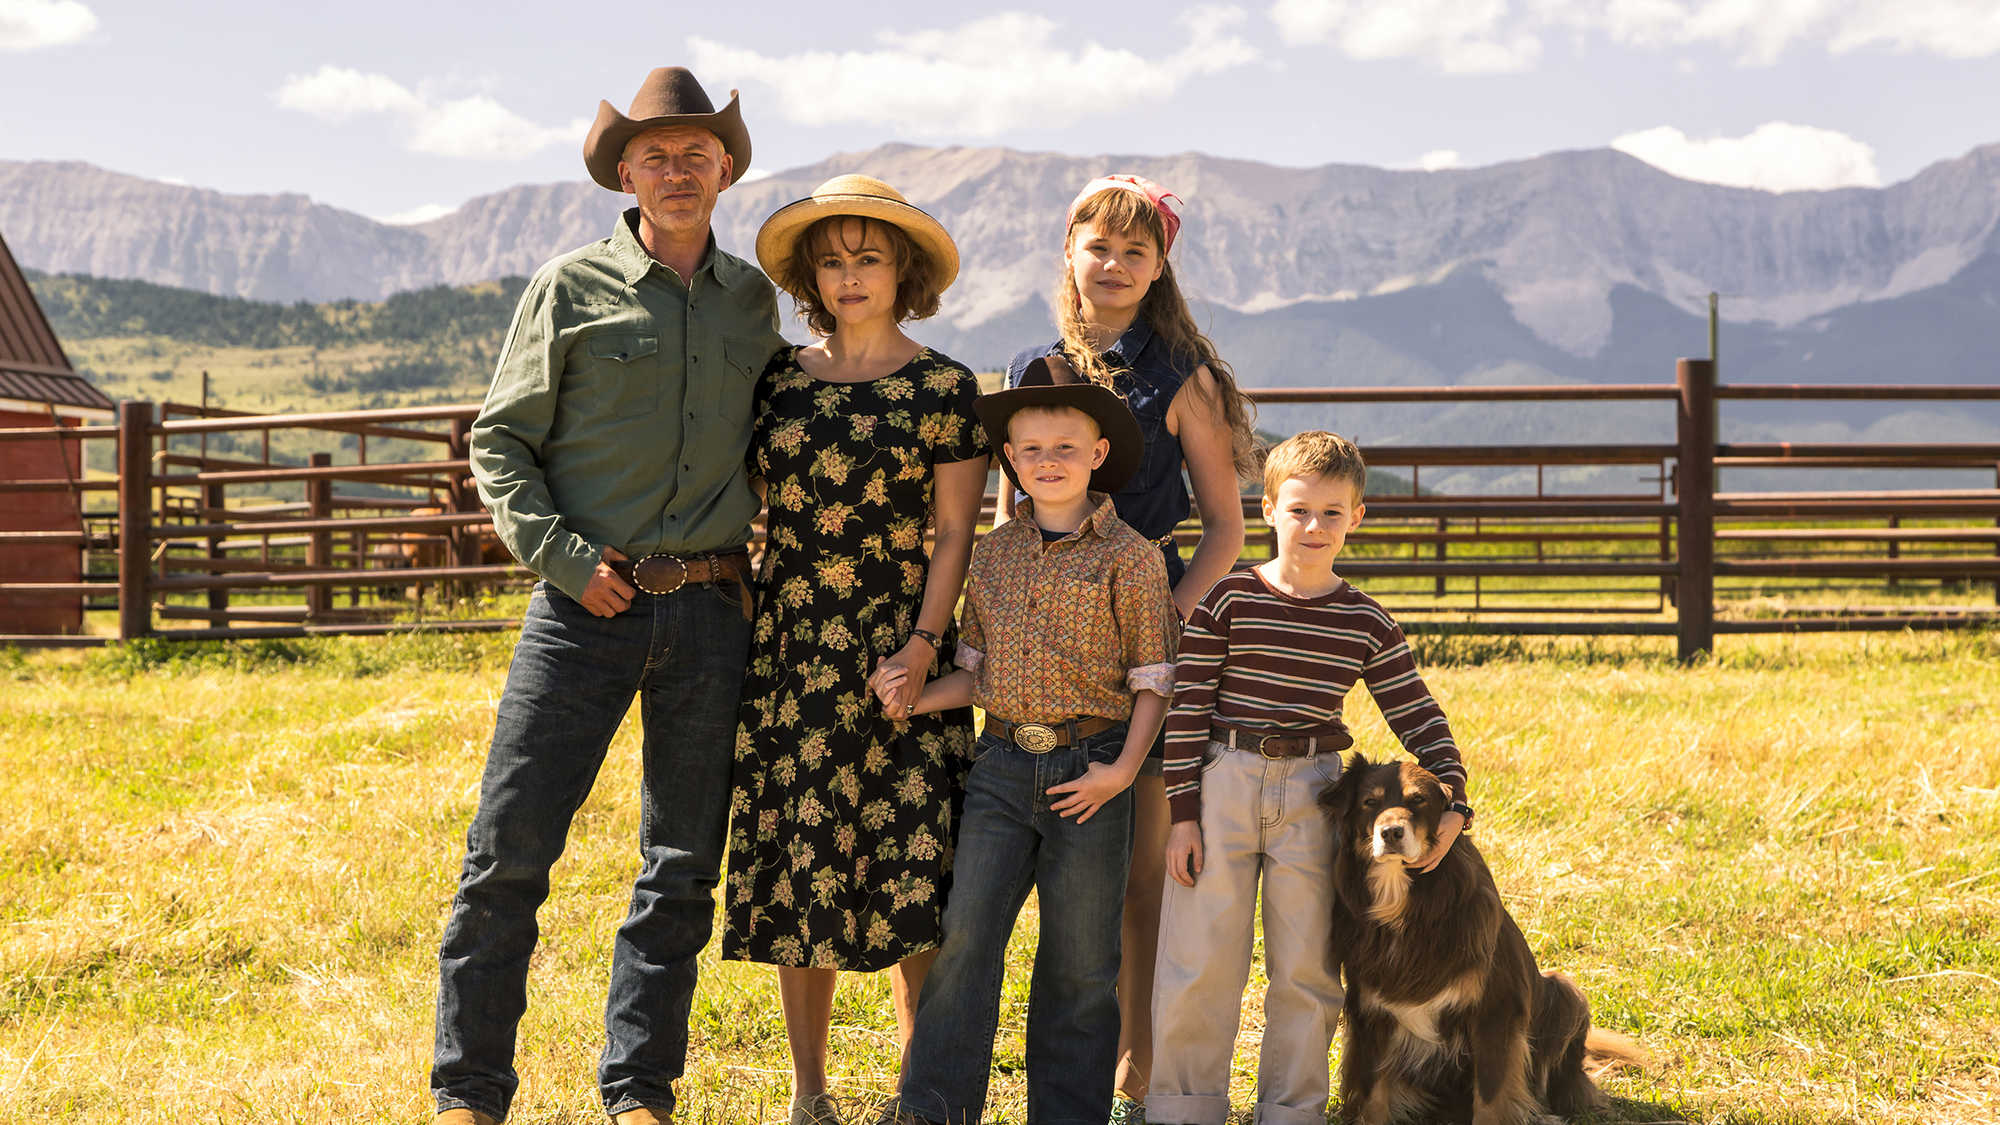 The Young and Prodigious T.S. Spivet 3D (image 2)